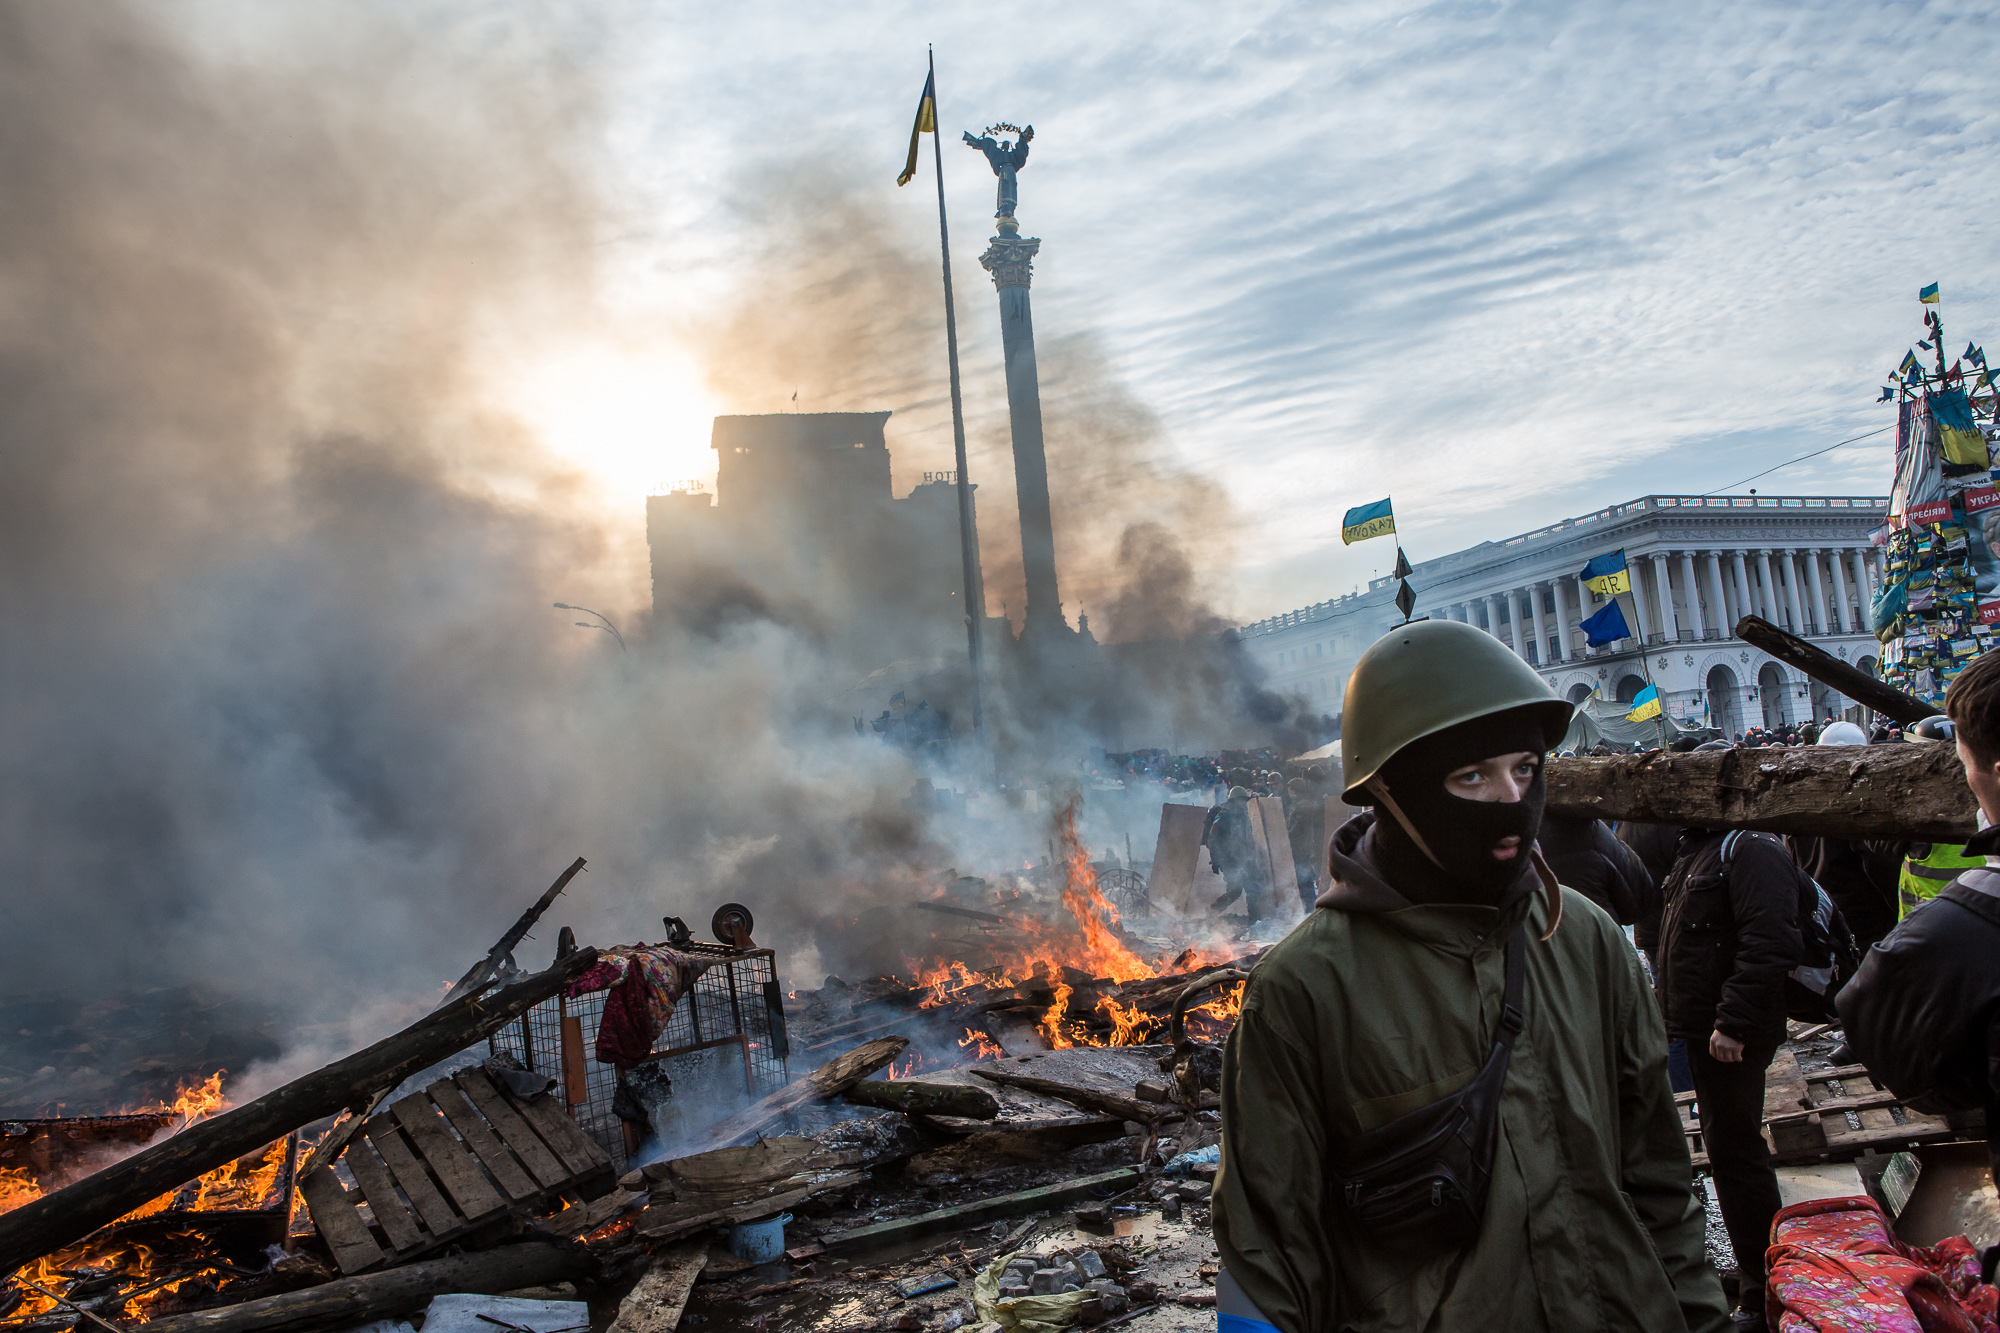  Anti-government protesters walk amid debris and flames near the perimeter of Independence Square, known as Maidan, on February 19, 2014 in Kiev, Ukraine. After several weeks of calm, violence has again flared between police and anti-government prote